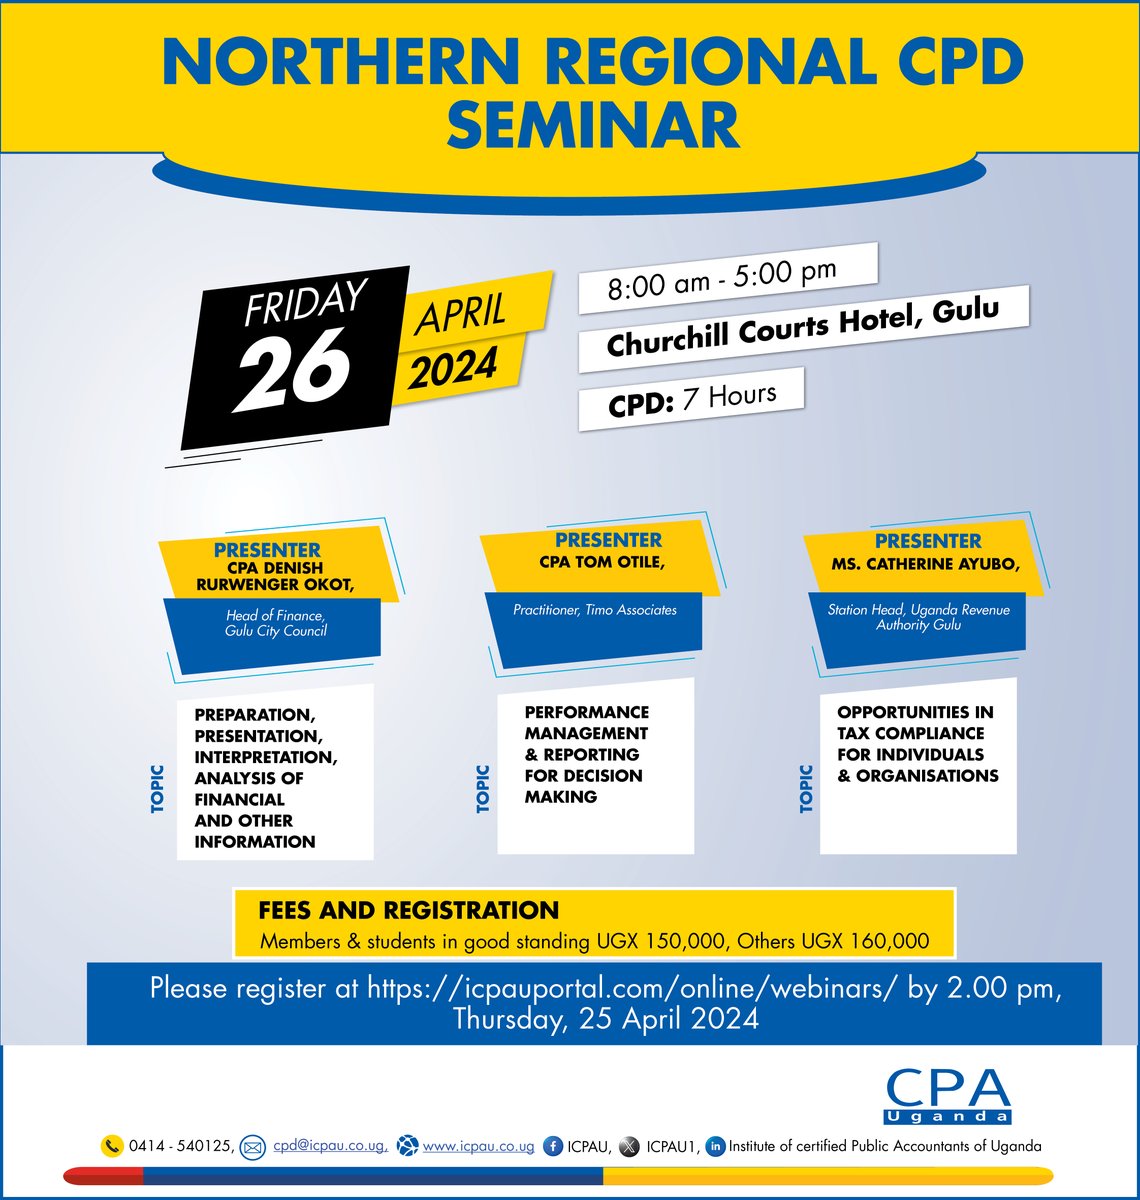 Calling all accountants in the Northern Region! Don't miss the CPD Seminar at Churchill Courts Hotel, Gulu on April 26th, featuring expert presenters CPA Denish Rurwenger Okot, CPA Tom Otile, and Ms. Catherine Ayubo. Register now: bit.ly/NorthernCPD #WeCreateImpact